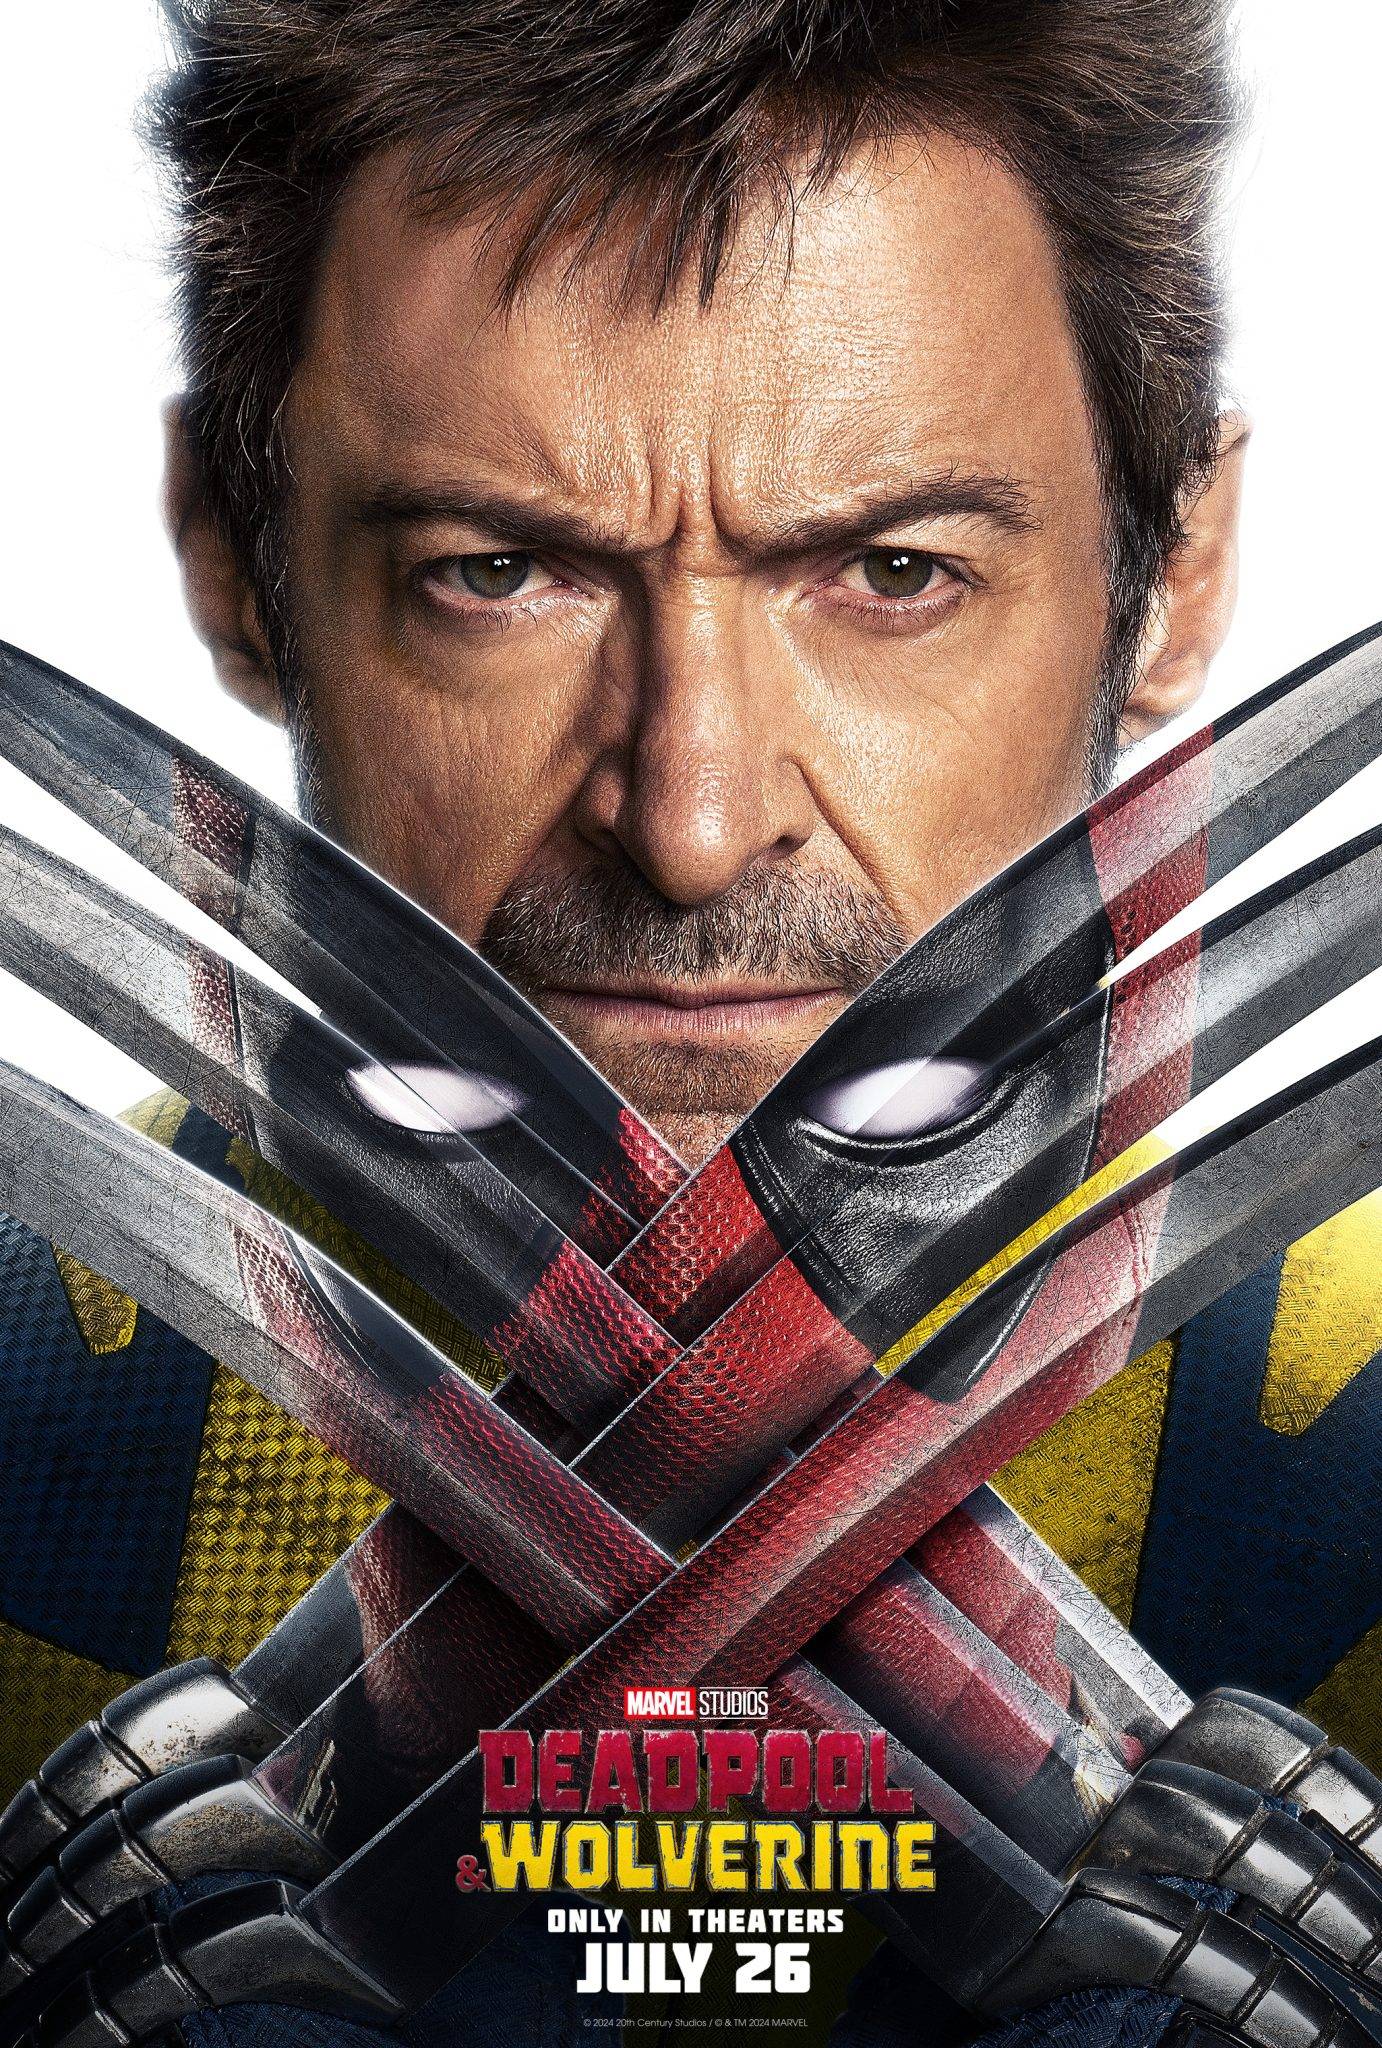 'Deadpool and Wolverine' poster